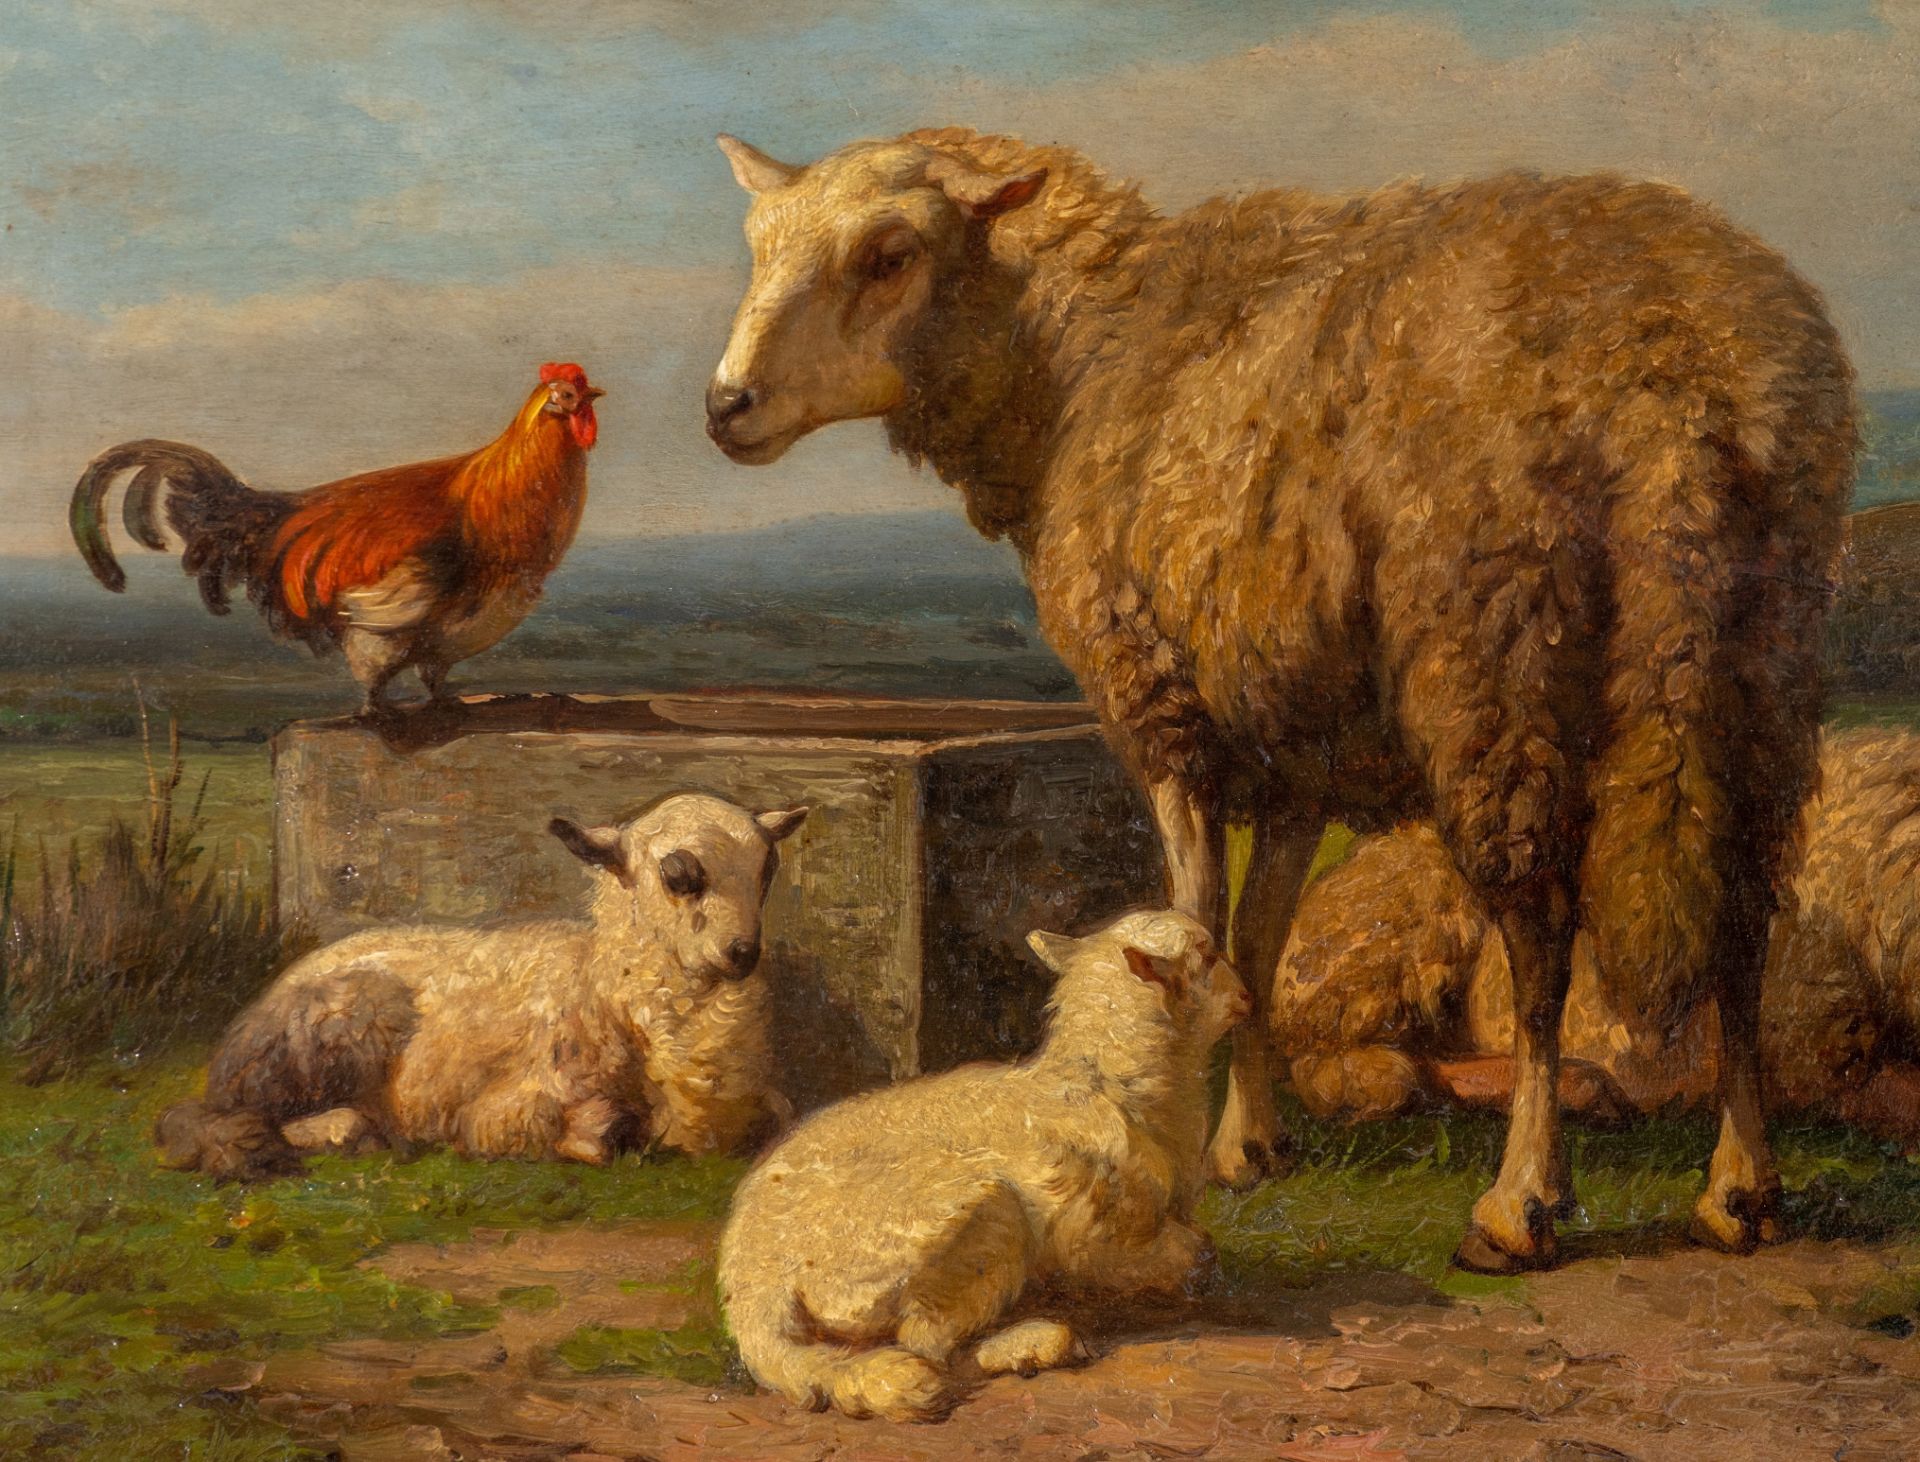 Louis Robbe (1806-1887), sheep and a rooster in a landscape, oil on panel, 30 x 43 cm - Image 5 of 6